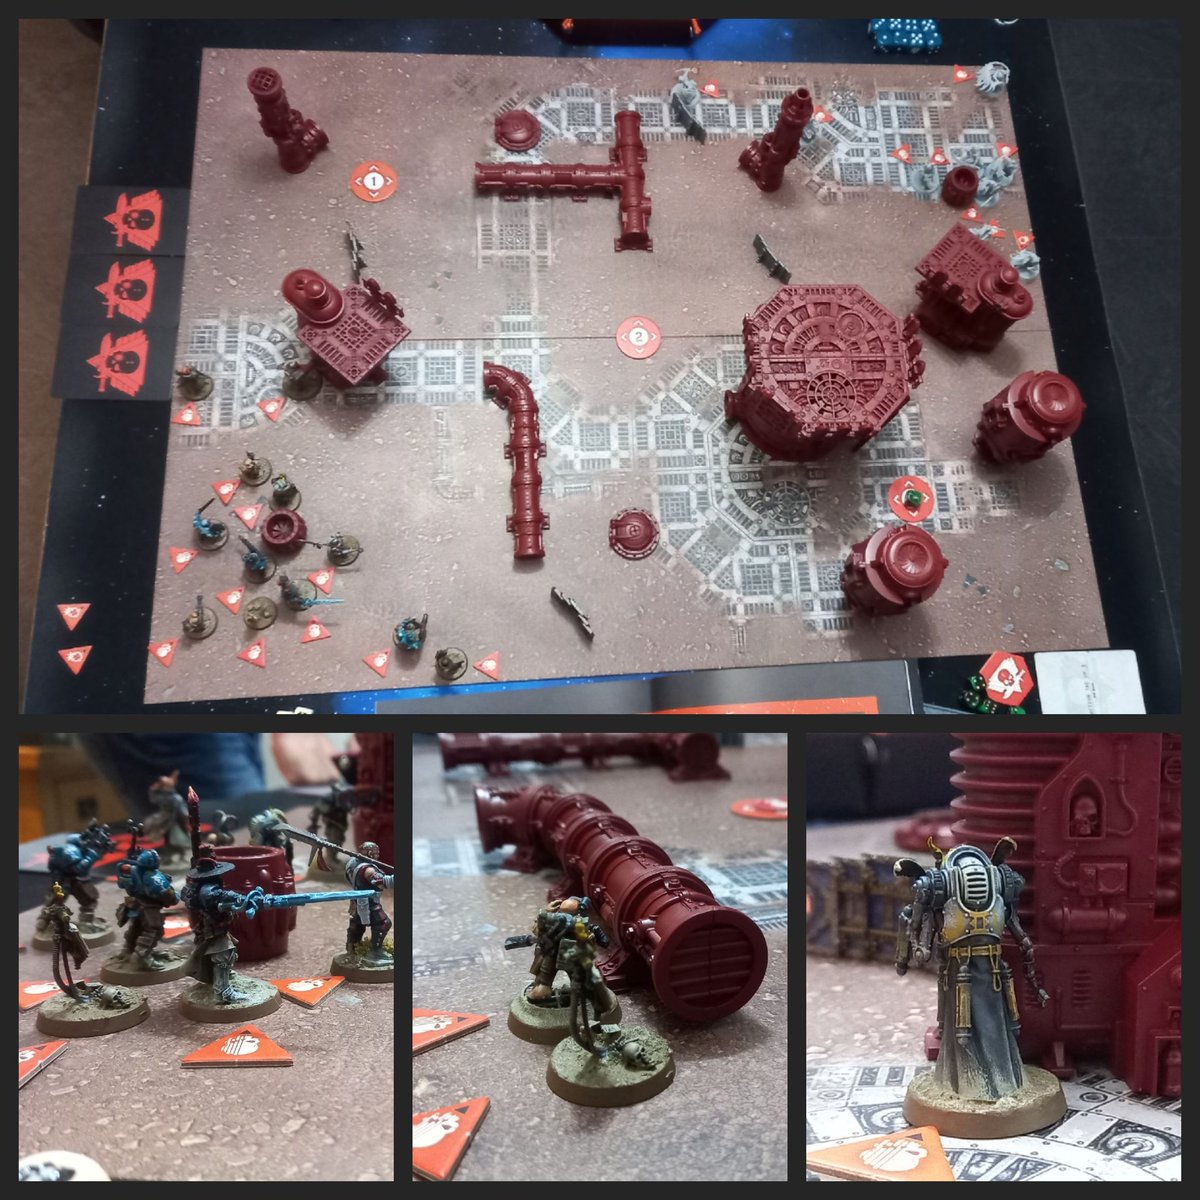 Games night is here again, and the WH40K Kill Team campaign continues. This time my Inquisitor team playing onto the new Mandrake team. The Mandrakes took the win.

#wh40k #warhammer #warhammer40000  #warhammeraos #boardgame #tabletopgame #game #gamenight #gaming #killteam